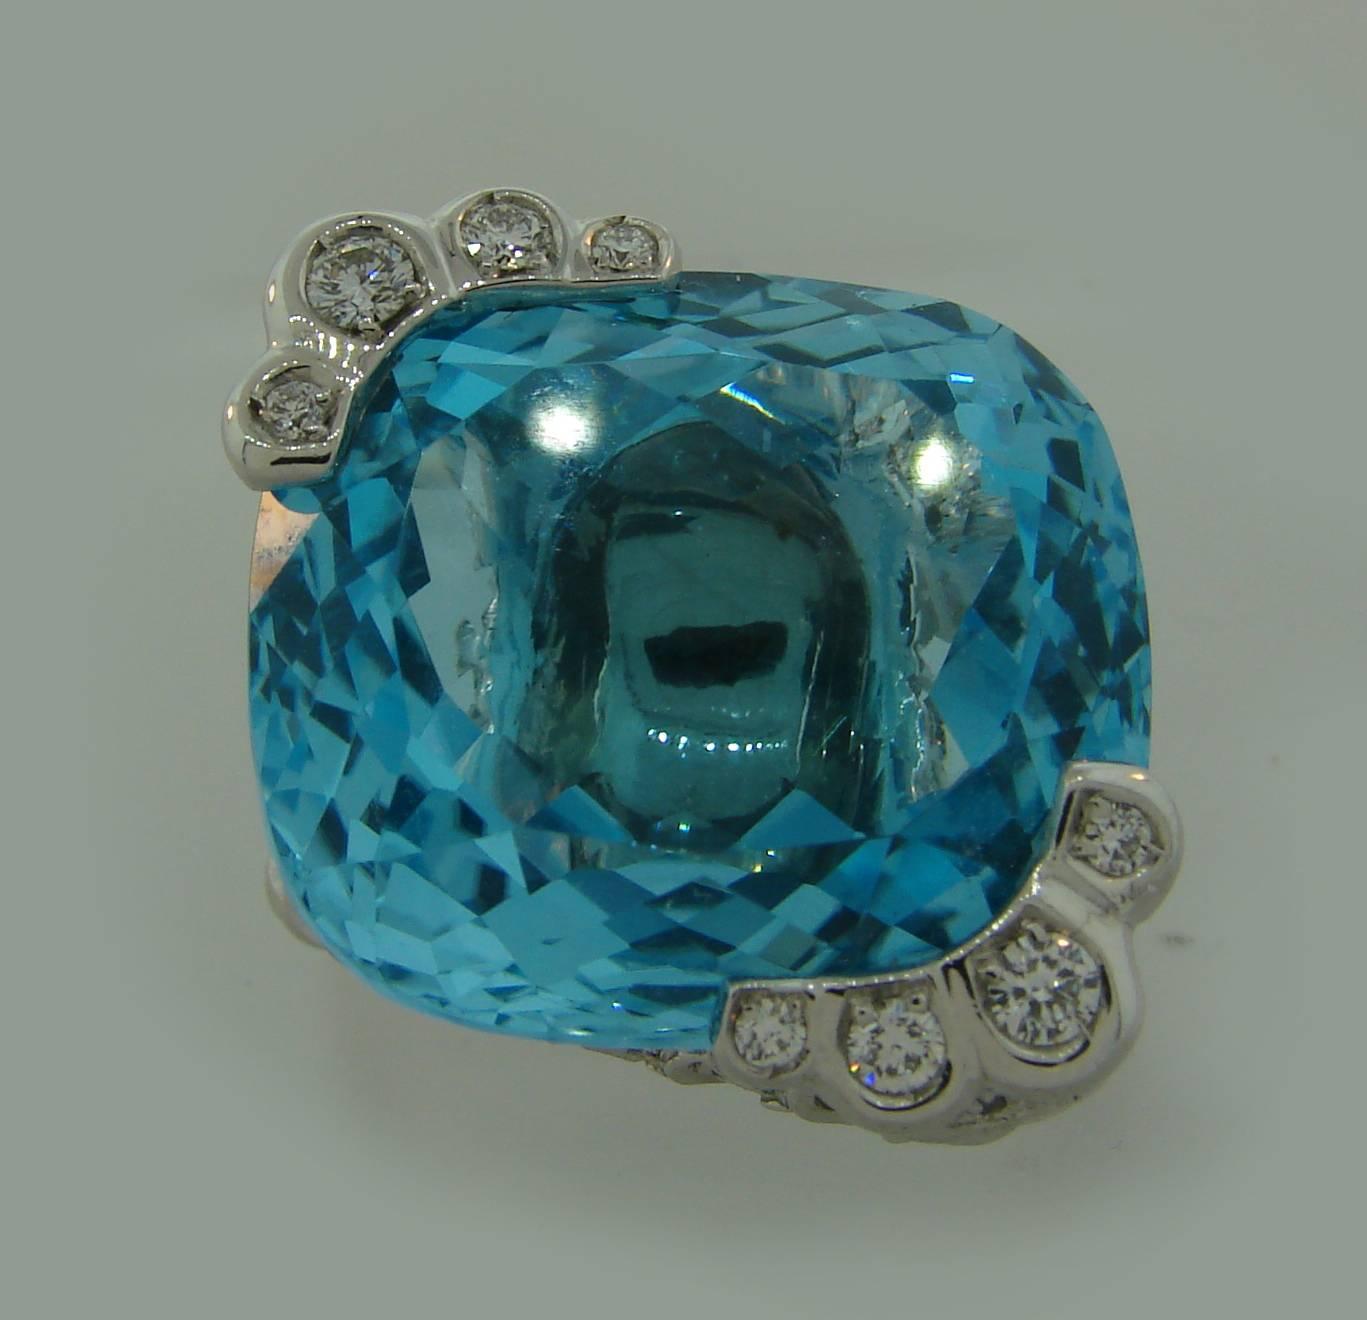 Stunning cocktail ring created by French company Piaget. Features a beautiful cushion cut blue topaz set in 18 karat white gold and accented with round brilliant cut diamonds (total weight approximately 1 carat). 
The blue topaz measures 20.07 x